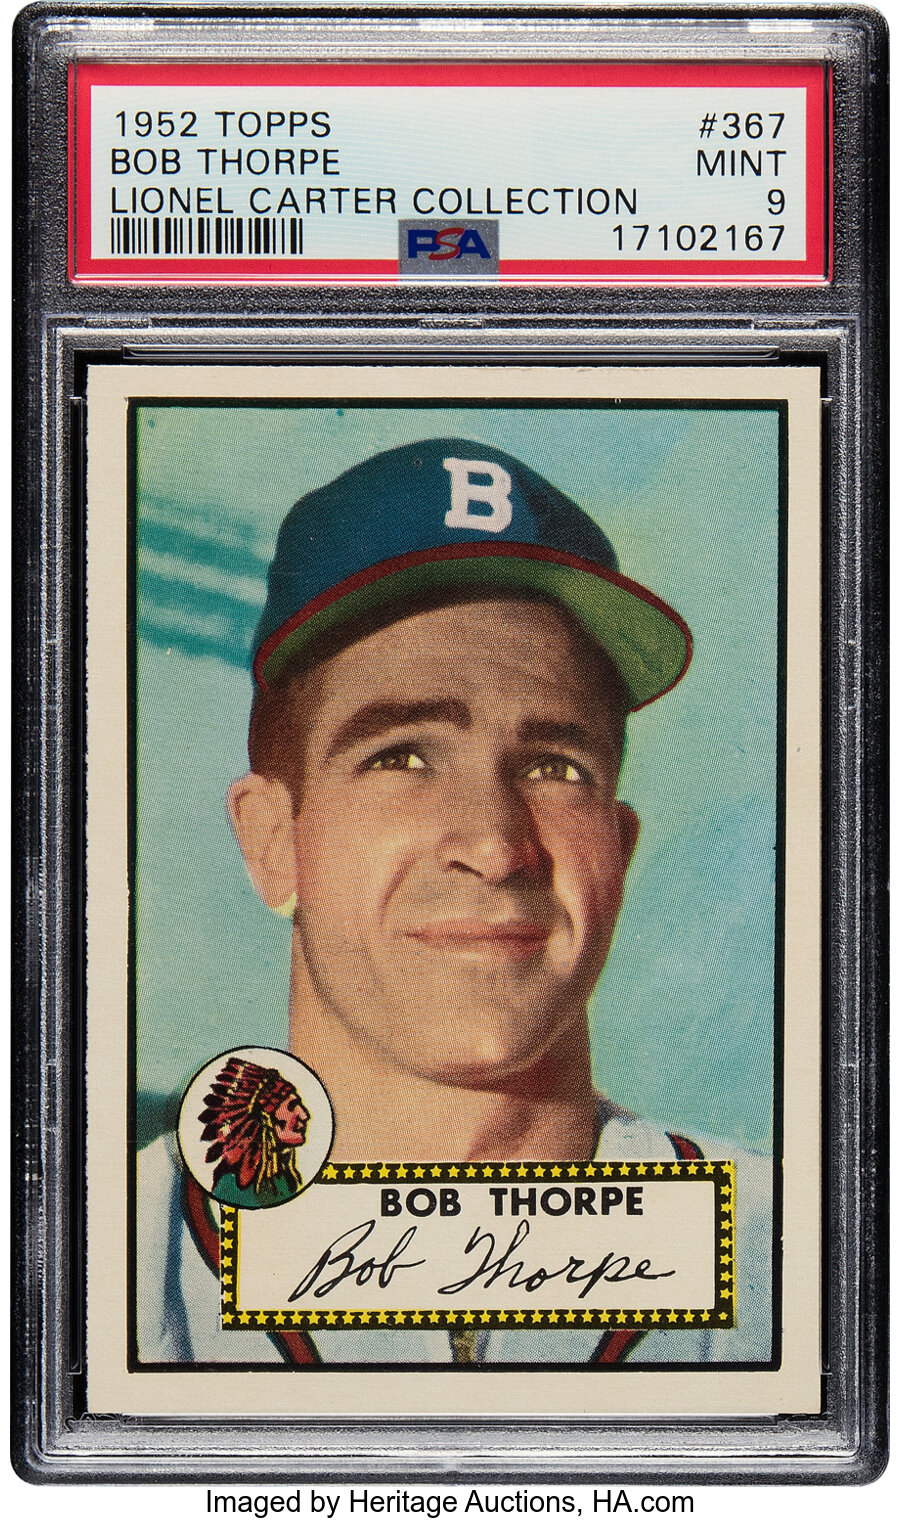 1952 Topps Bob Thorpe Rookie #367 PSA Mint 9 - Pop Two, One Superior! From the Lionel Carter Collection